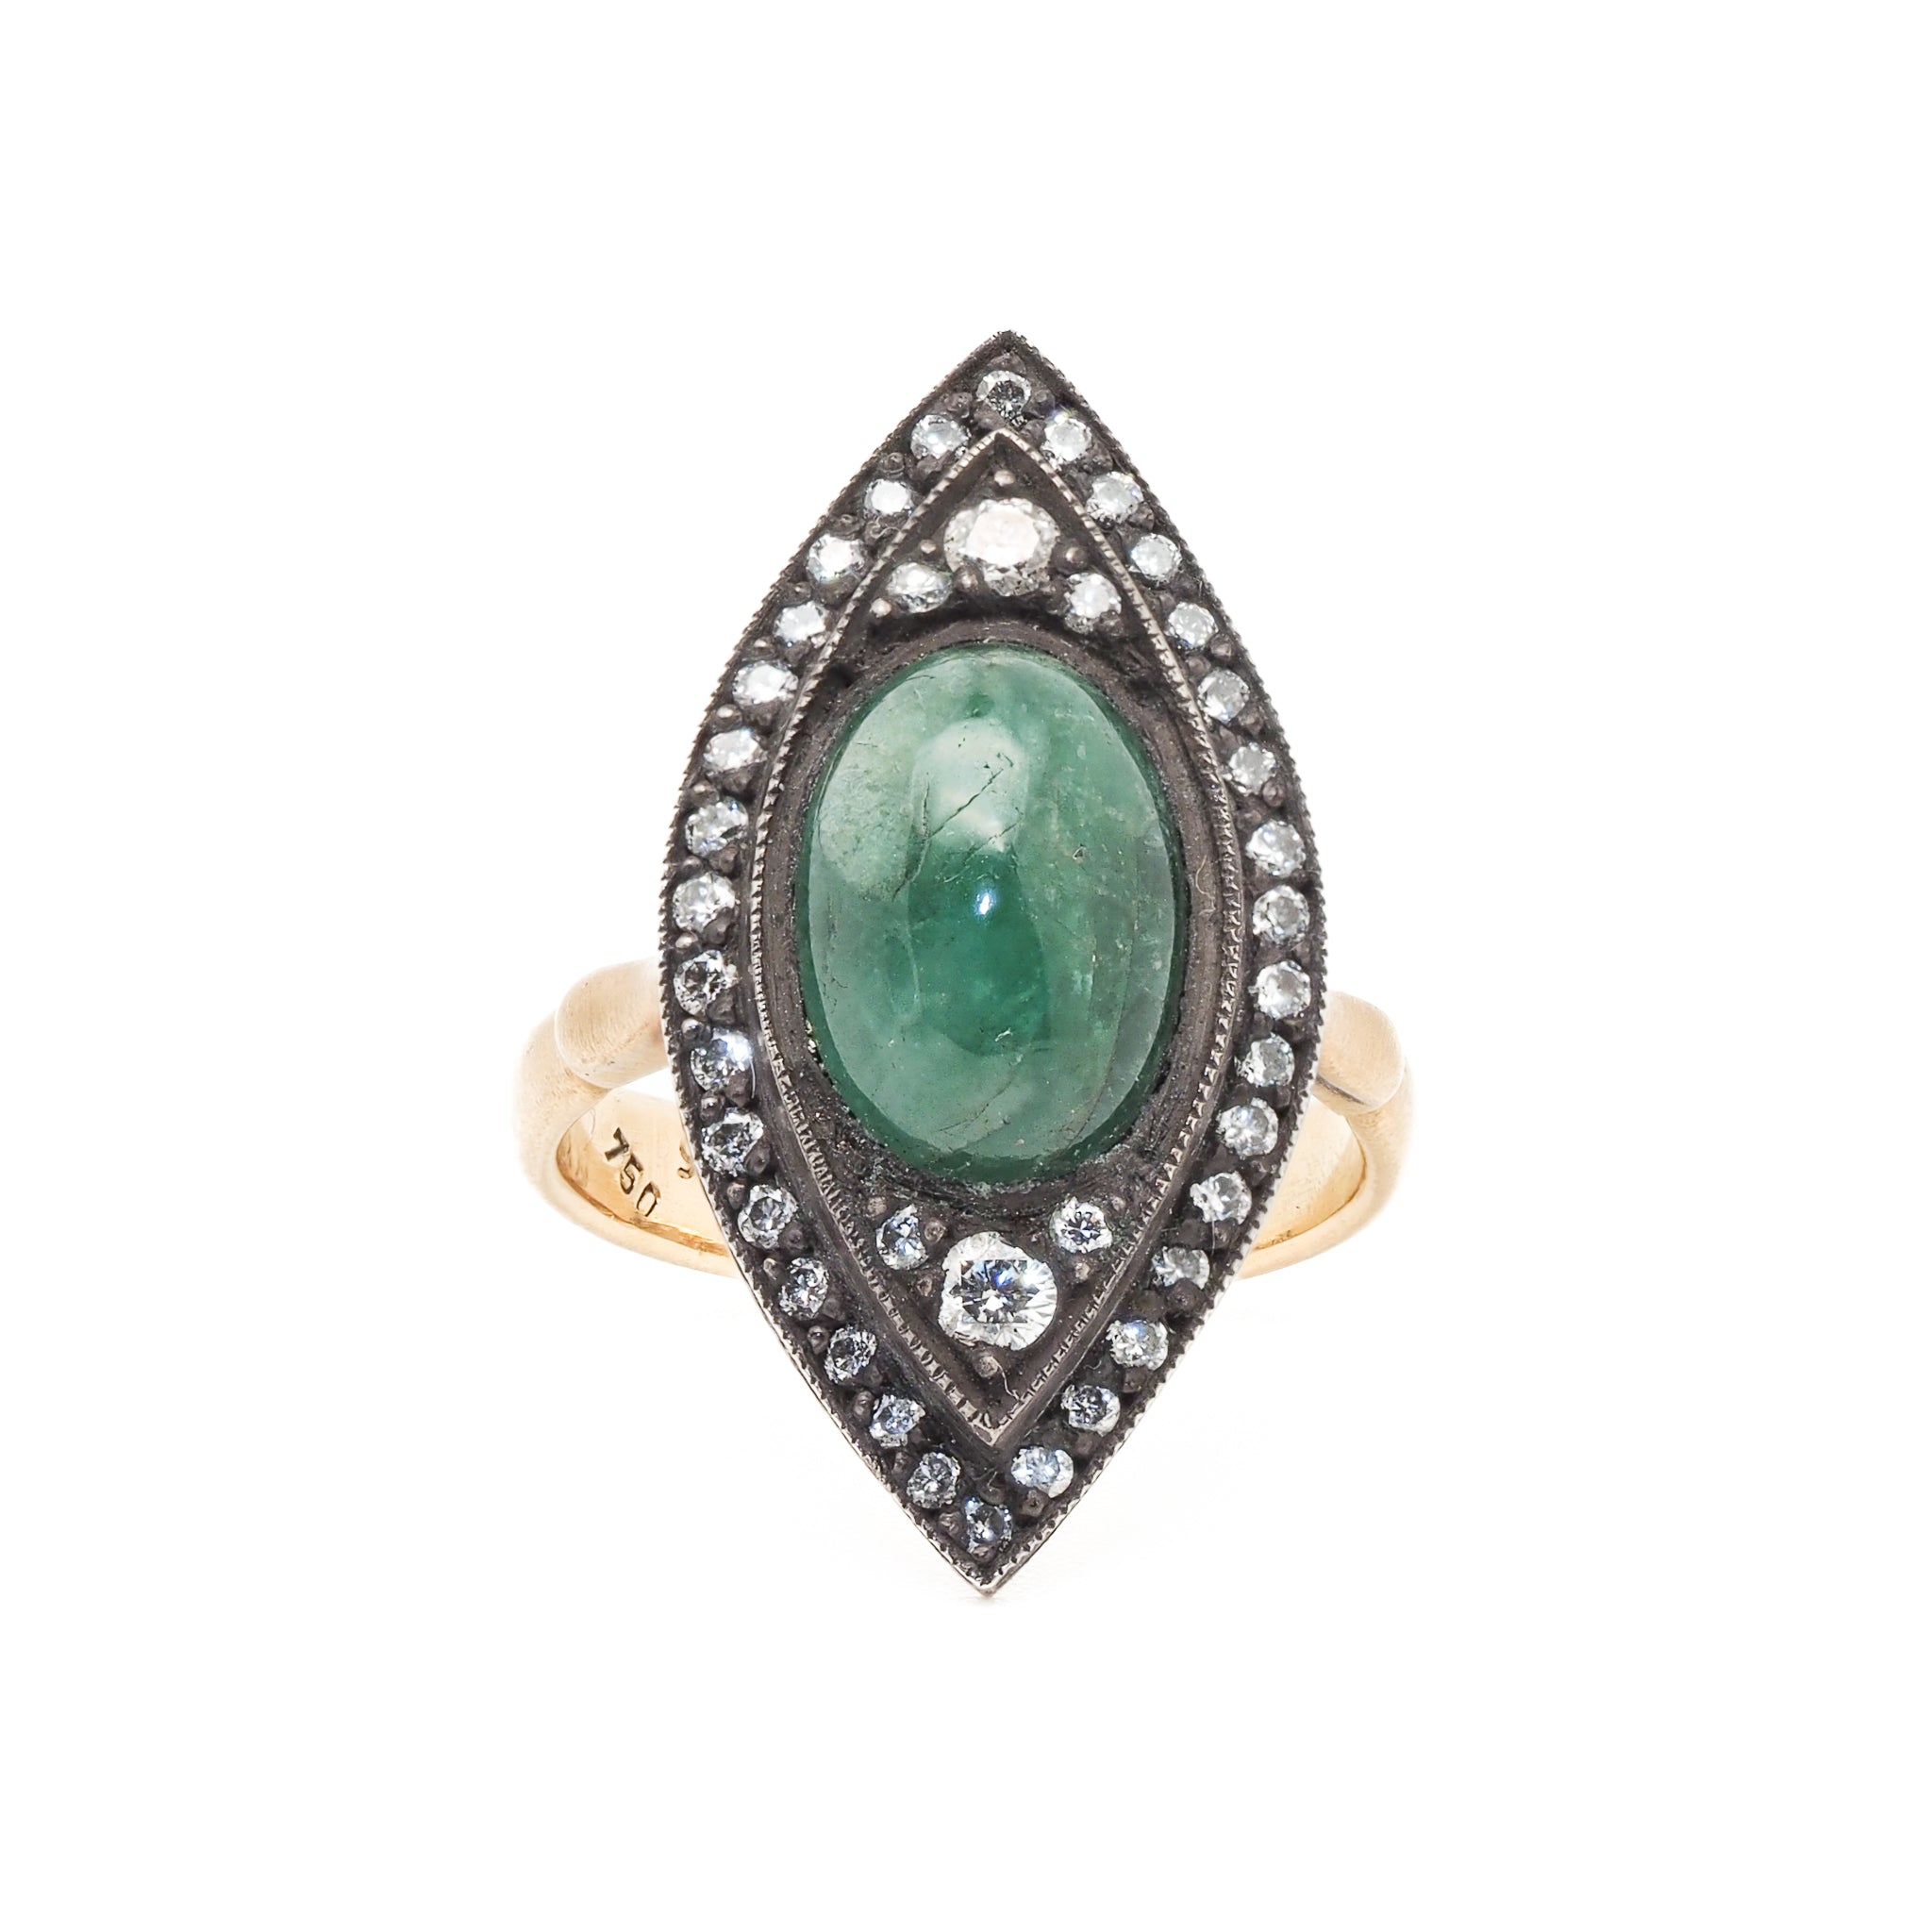 The Emerald &amp; Diamond Eye Ring featuring a stunning 3.50ct natural emerald surrounded by sparkling diamonds, set in 18k yellow gold.